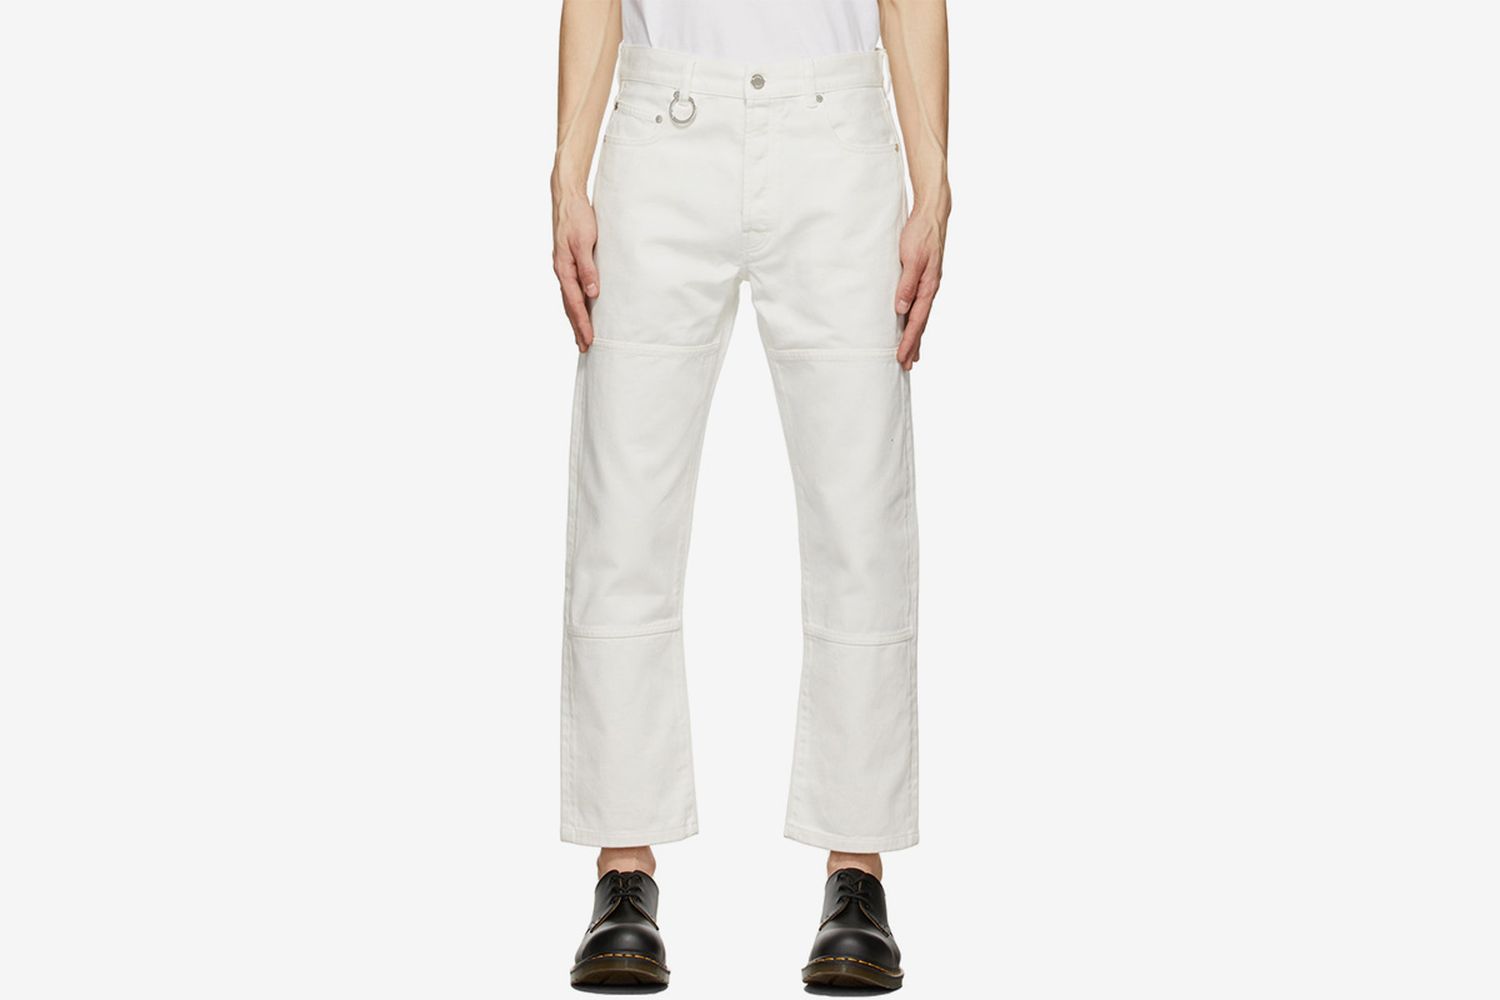 Pants for Spring: 10 of the Season's Best Pairs